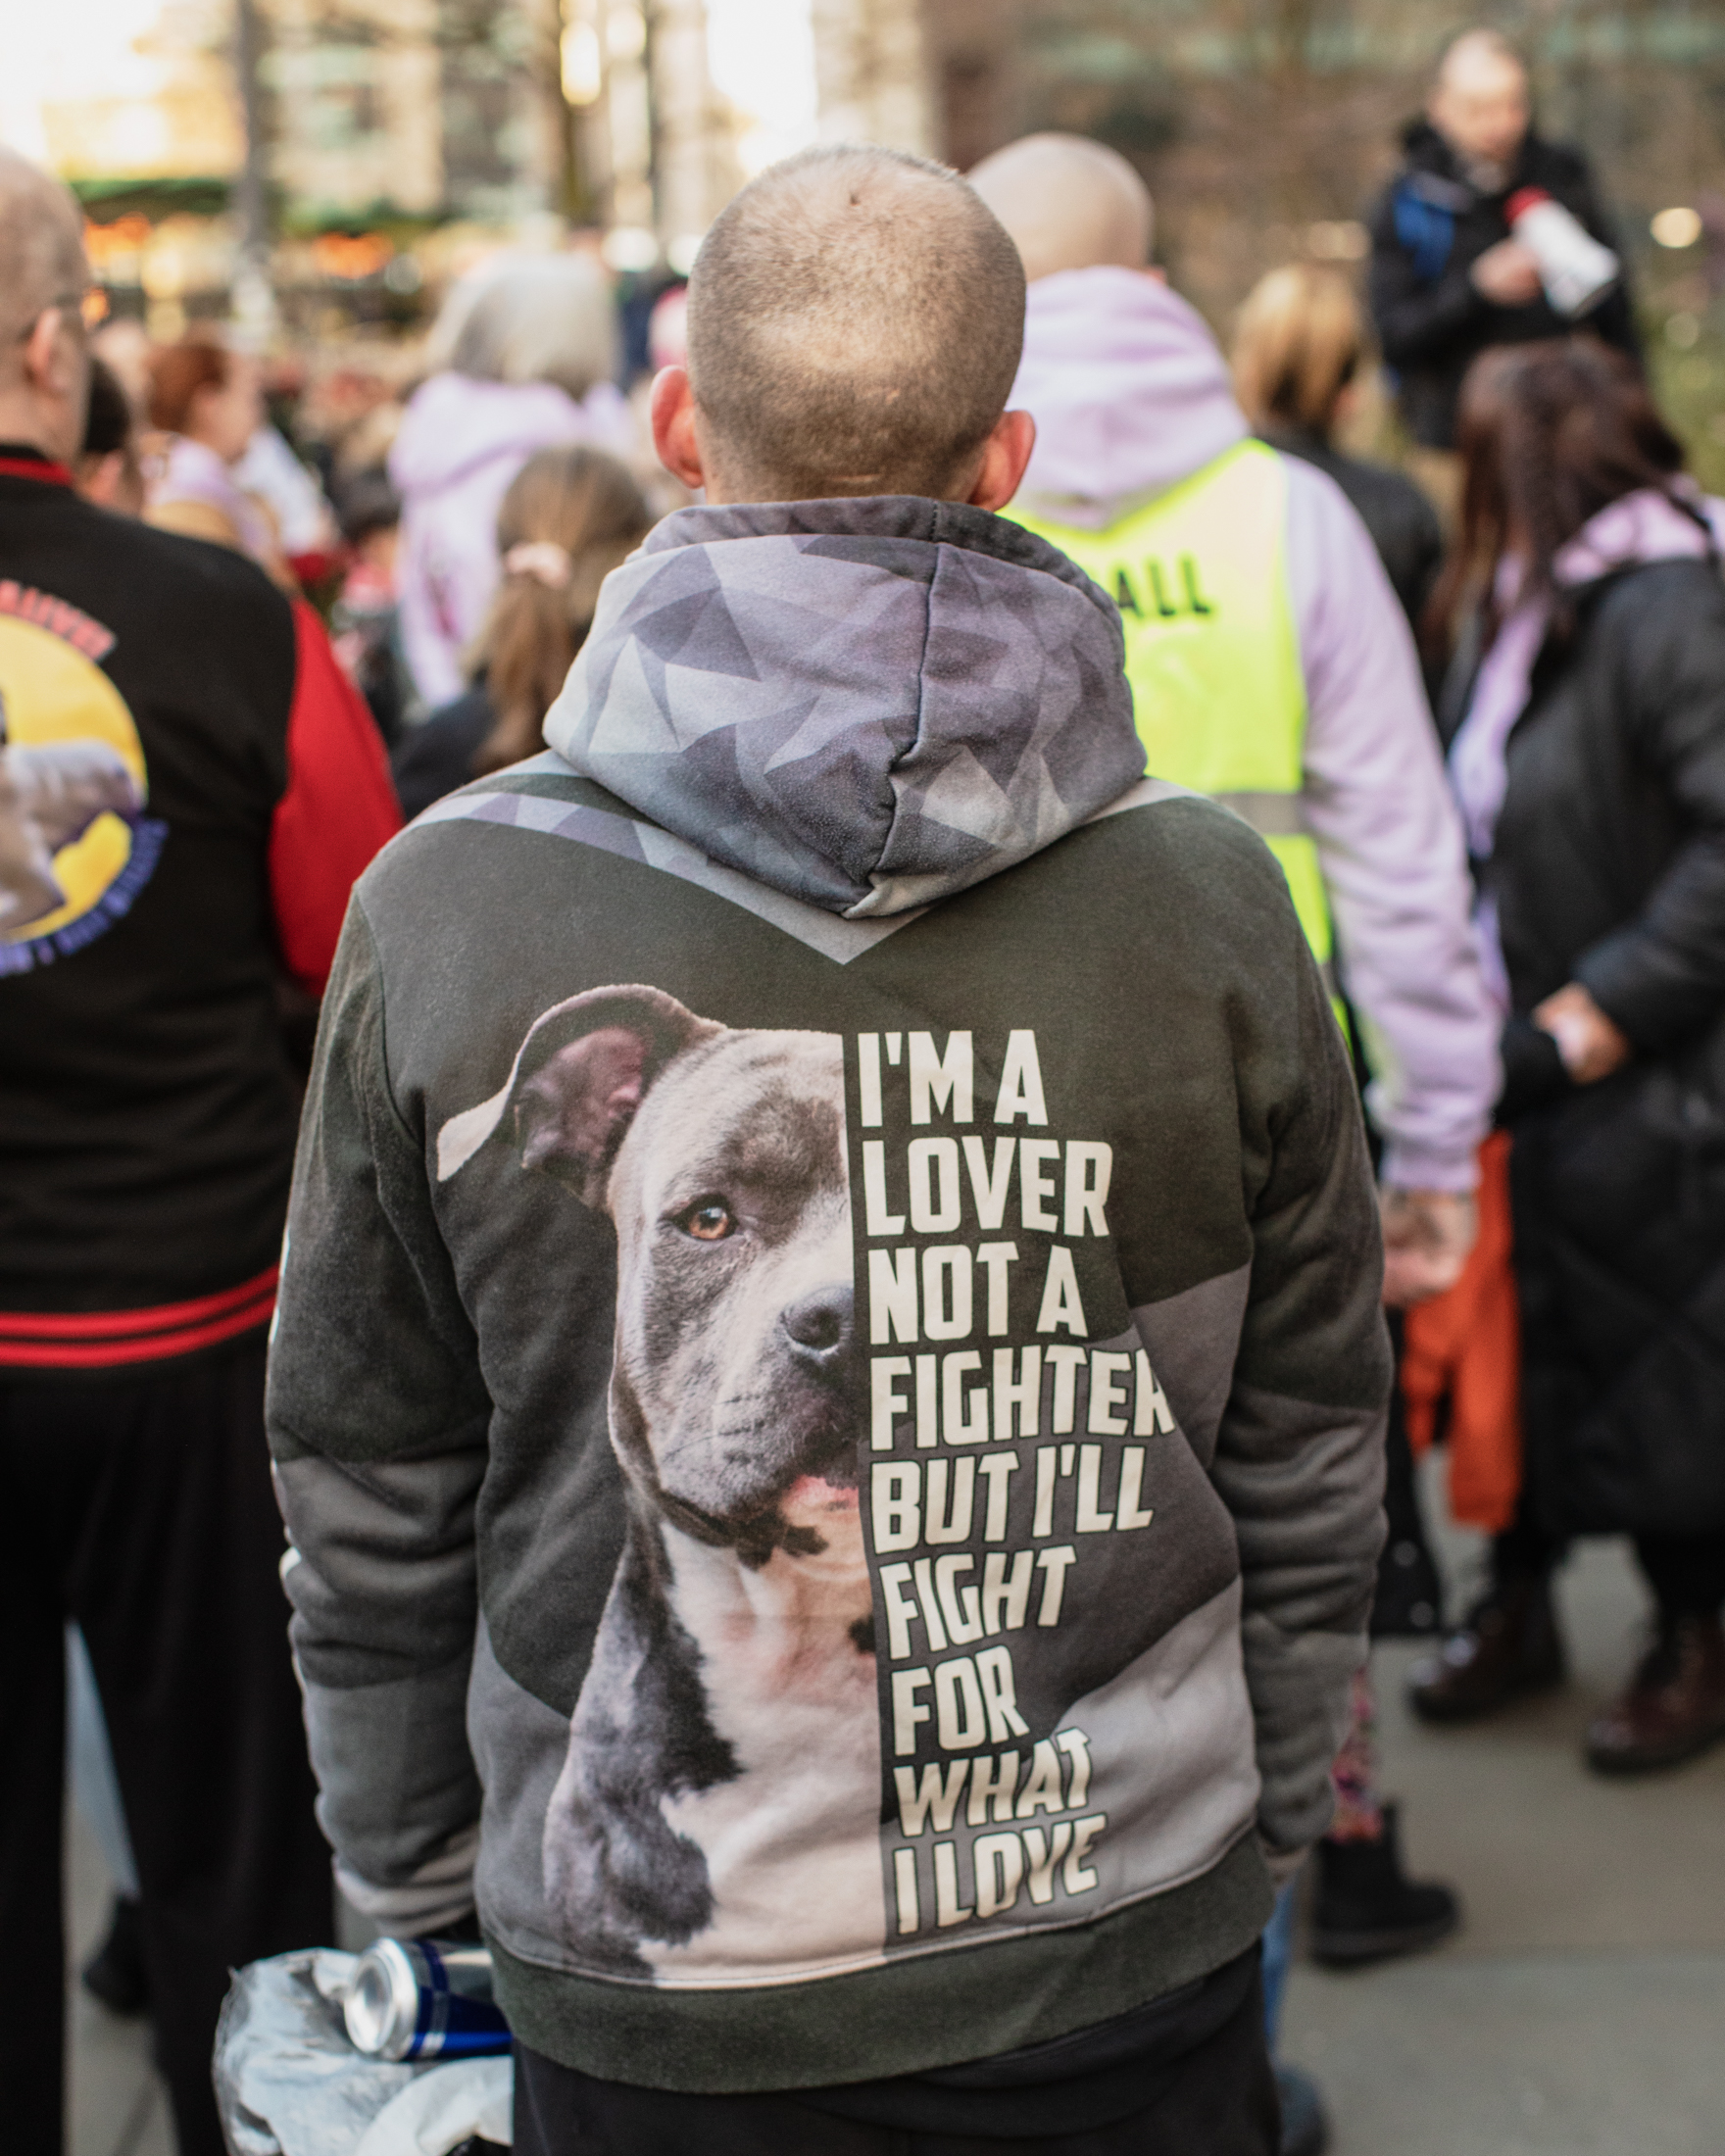 Manchester, UK: A man wearing an XL Bully hoodie that says 